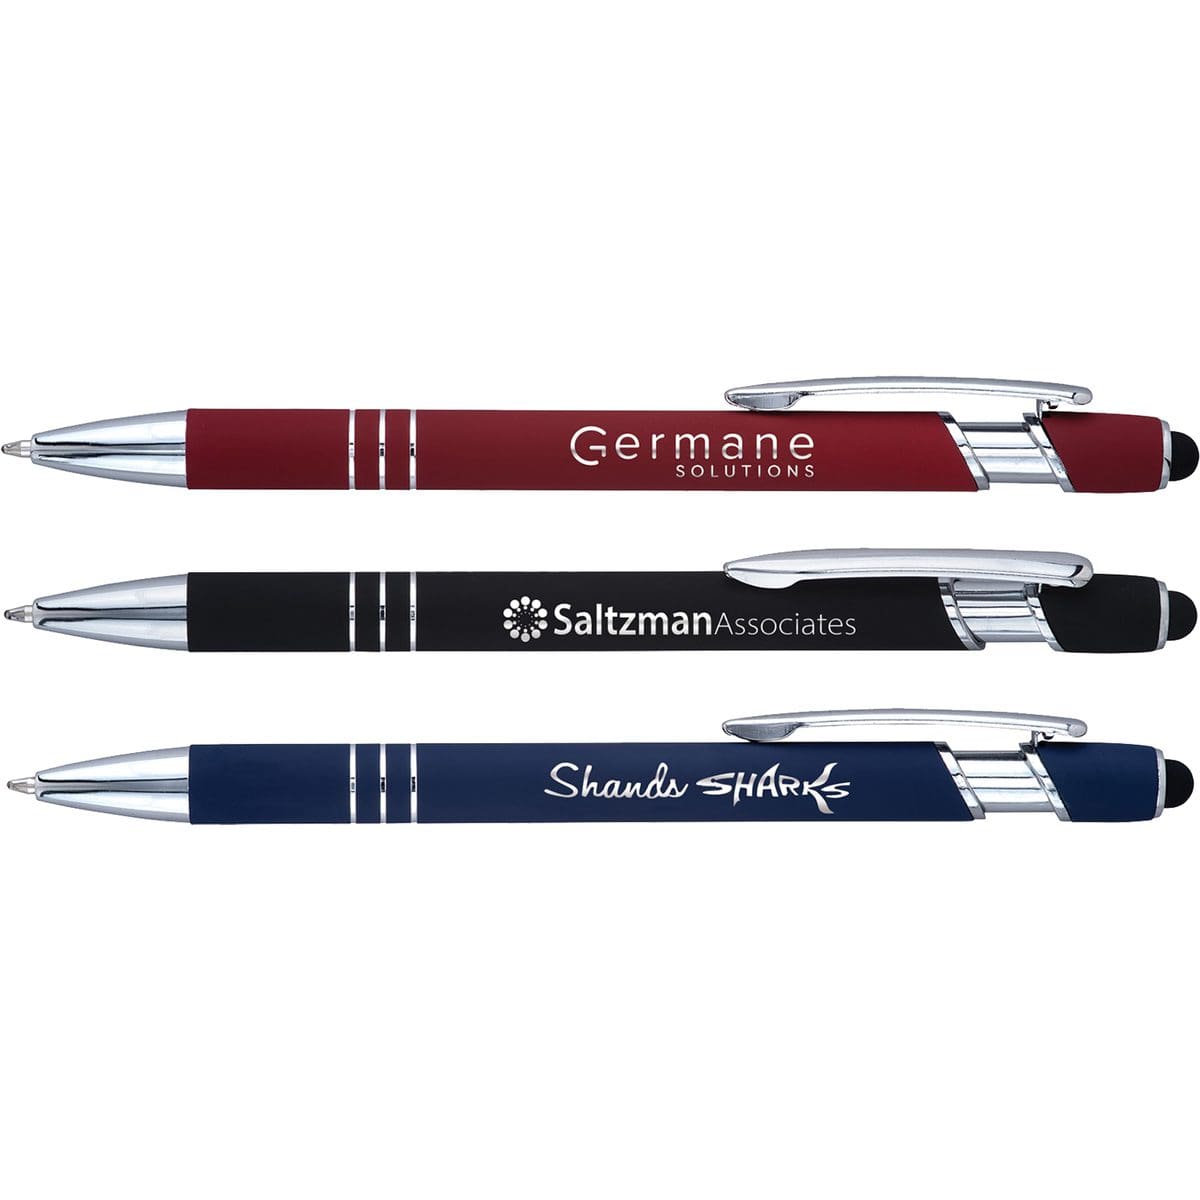 Fusion Marketing Our Top 20 Promotional Pens with Logo Options the Markets Where They Shine Textari Comfort Stylus Pen Copy